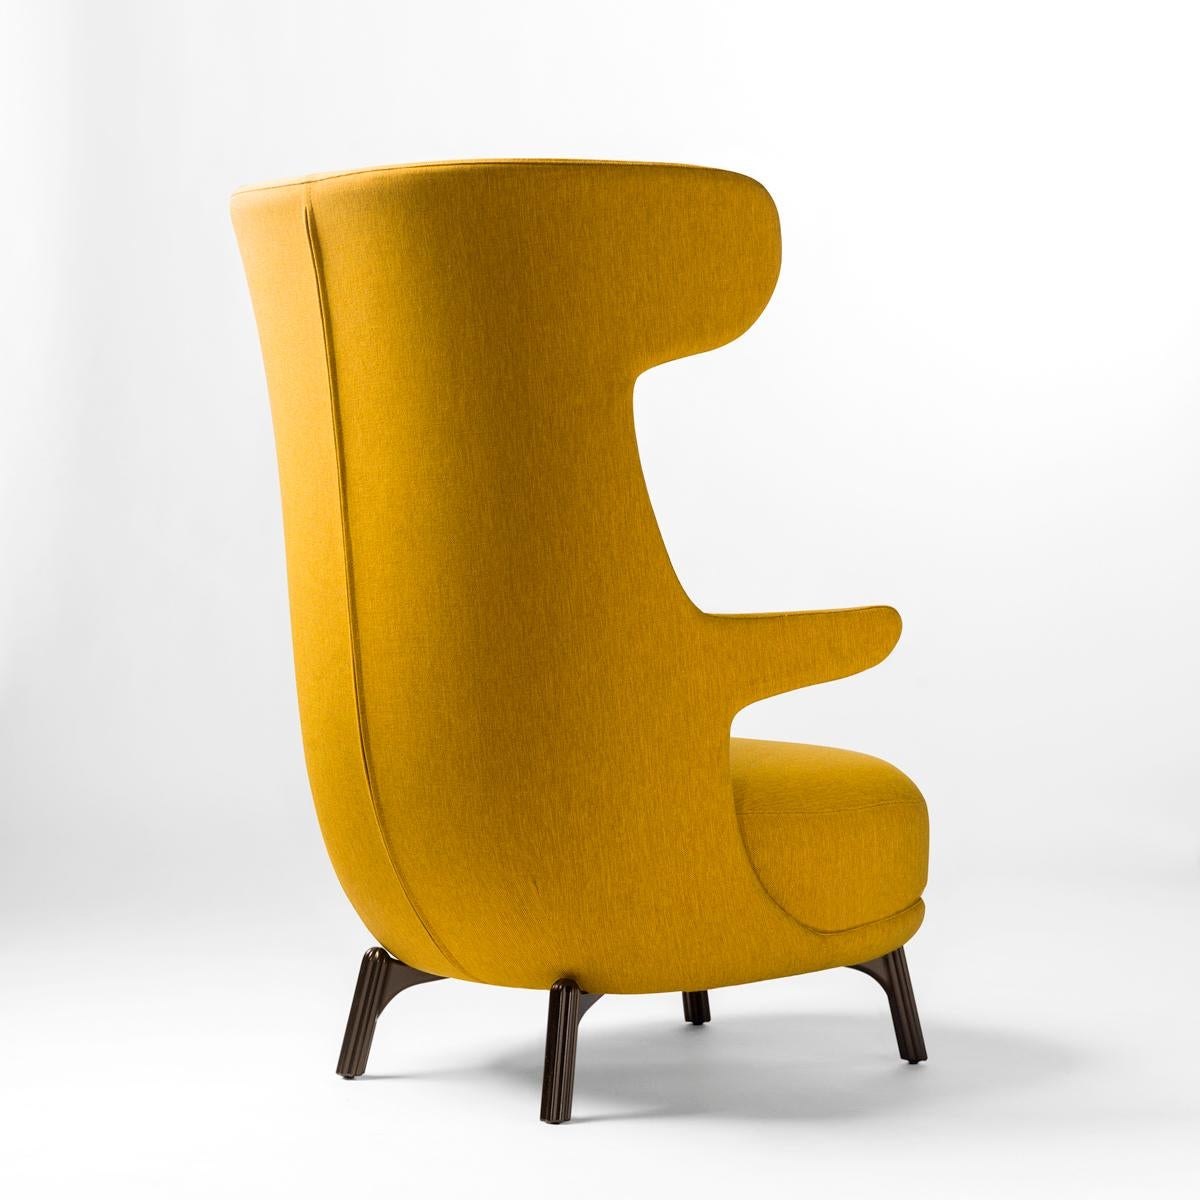 Modern Jaime Hayon, Contemporary, Monocolor in Yellow Fabric Upholstery Dino Armchair For Sale